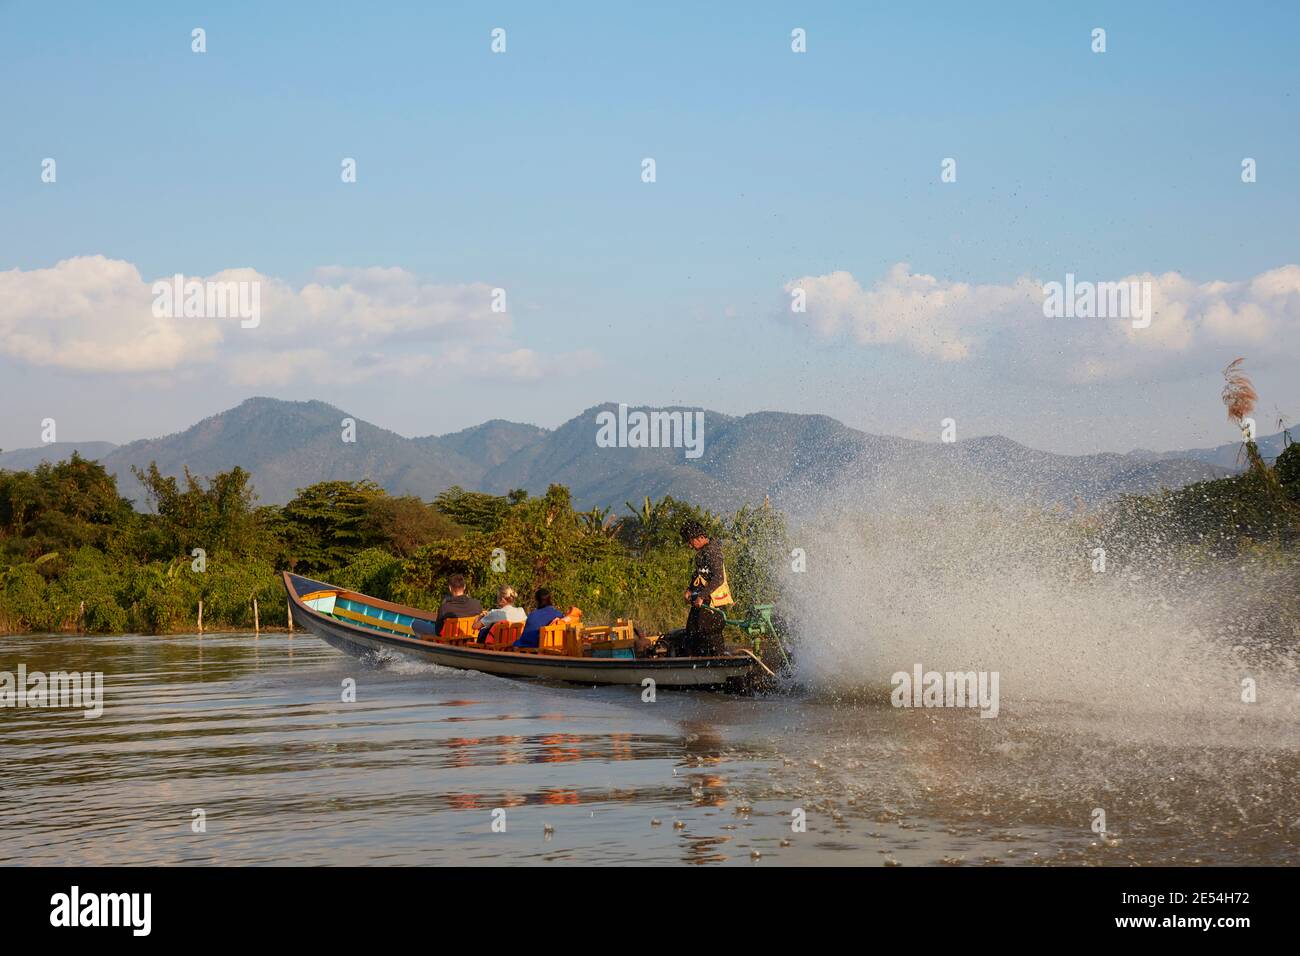 Traditional Wooden Boat navigation on Inle Lake, Myanmar. Stock Photo